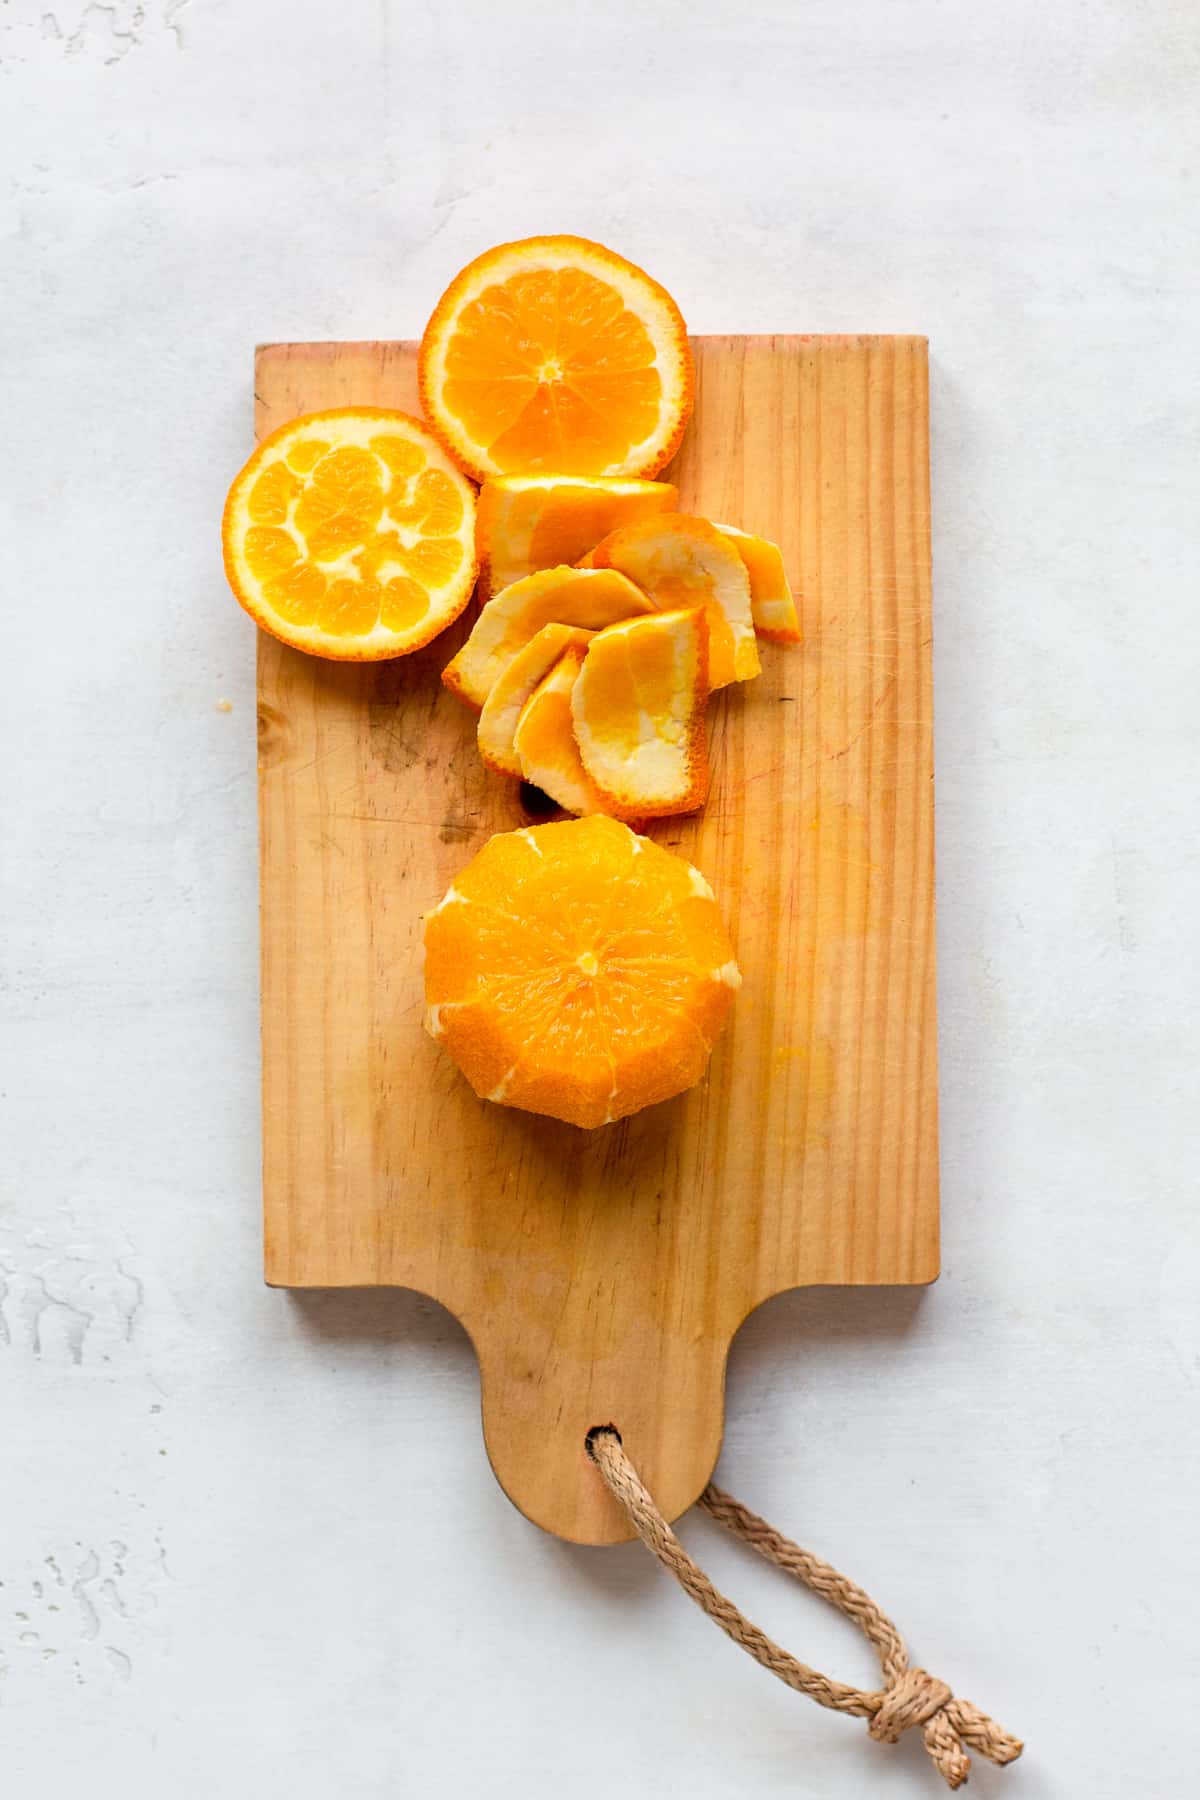 Peeled orange and its peels on a small wooden cutting board.